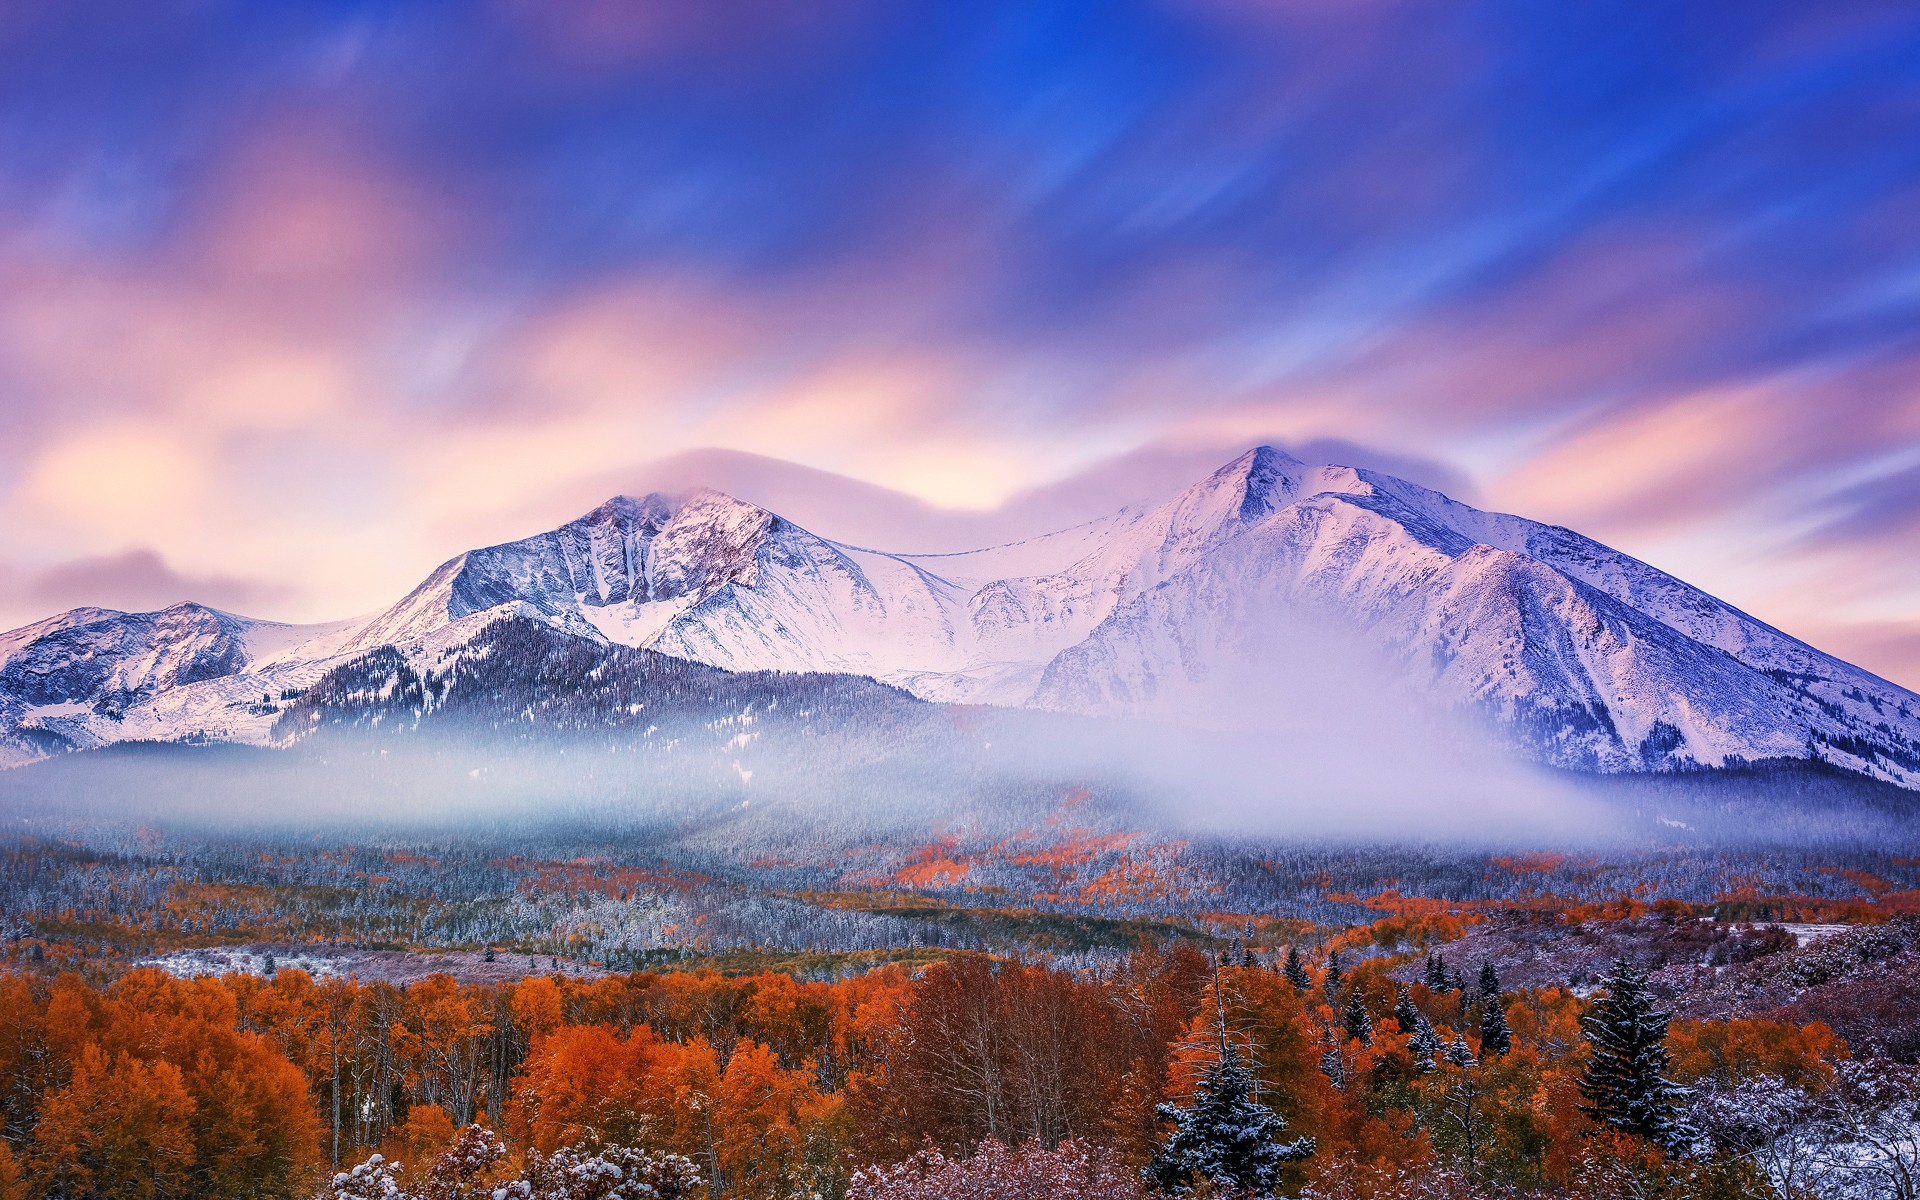 General 1920x1200 landscape morning mountains winter sky nature snowy peak trees